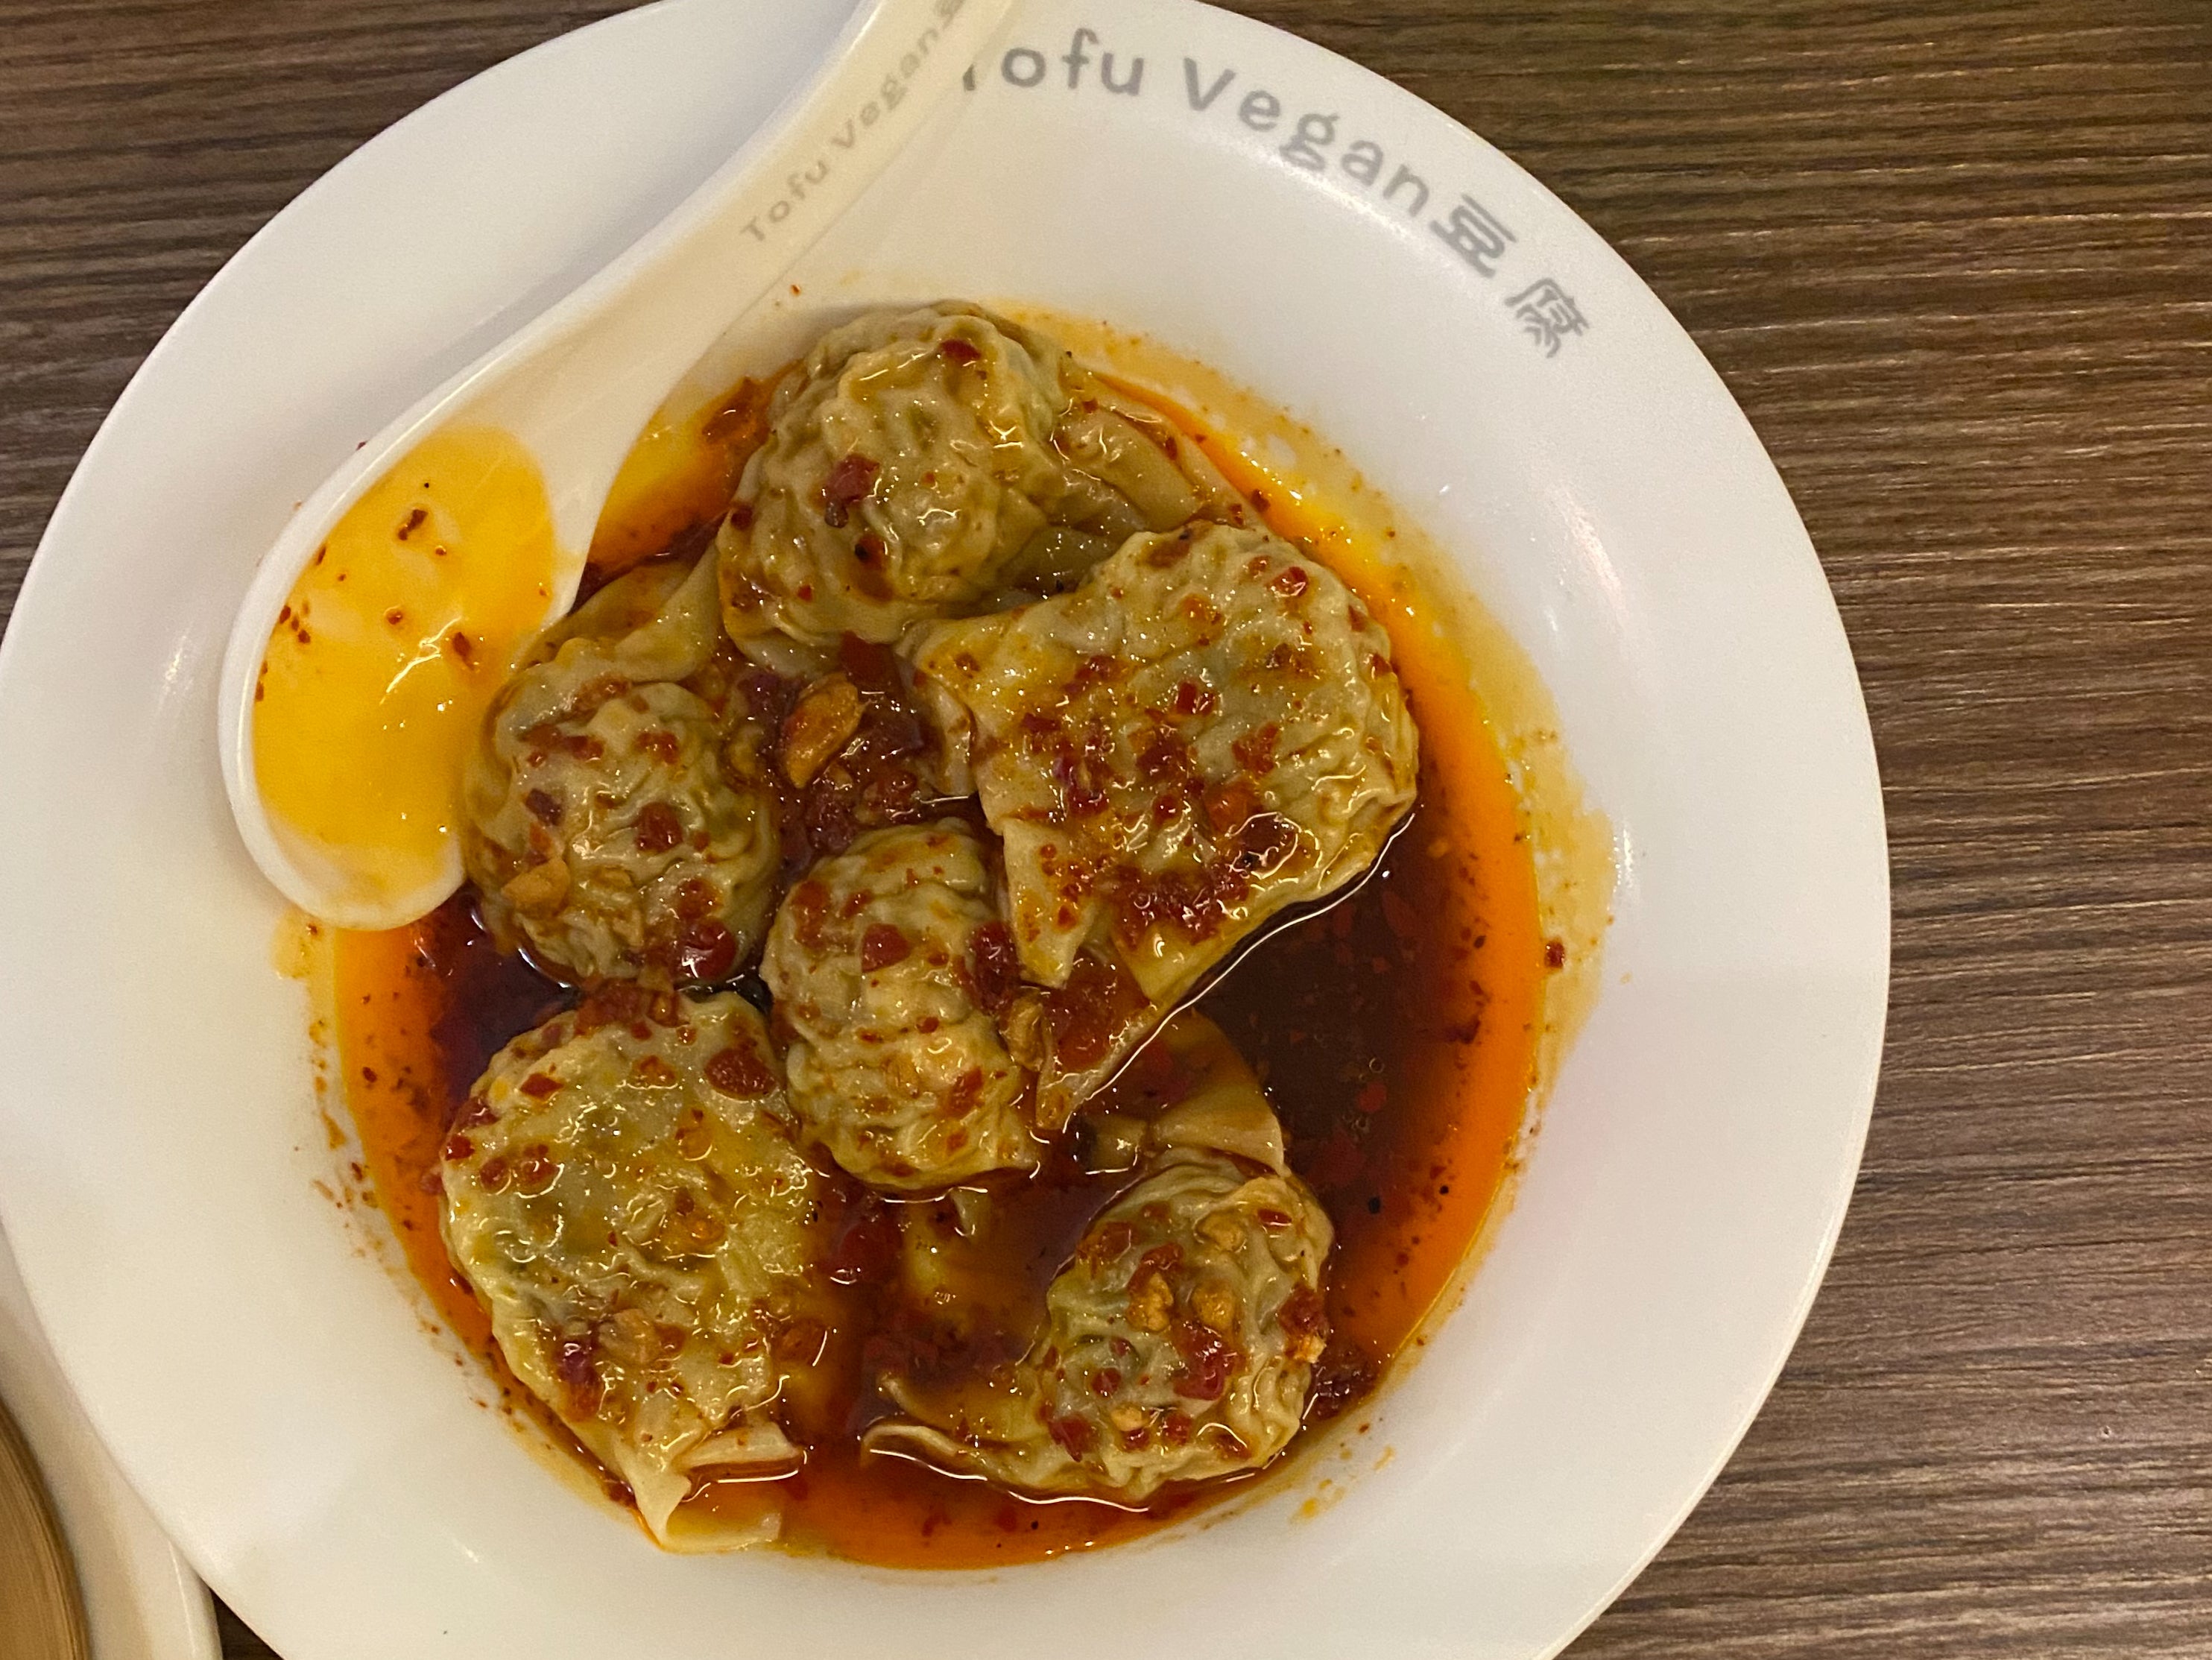 With wontons like these, it’s no surprise Tofu Vegan is fully booked for weeks to come